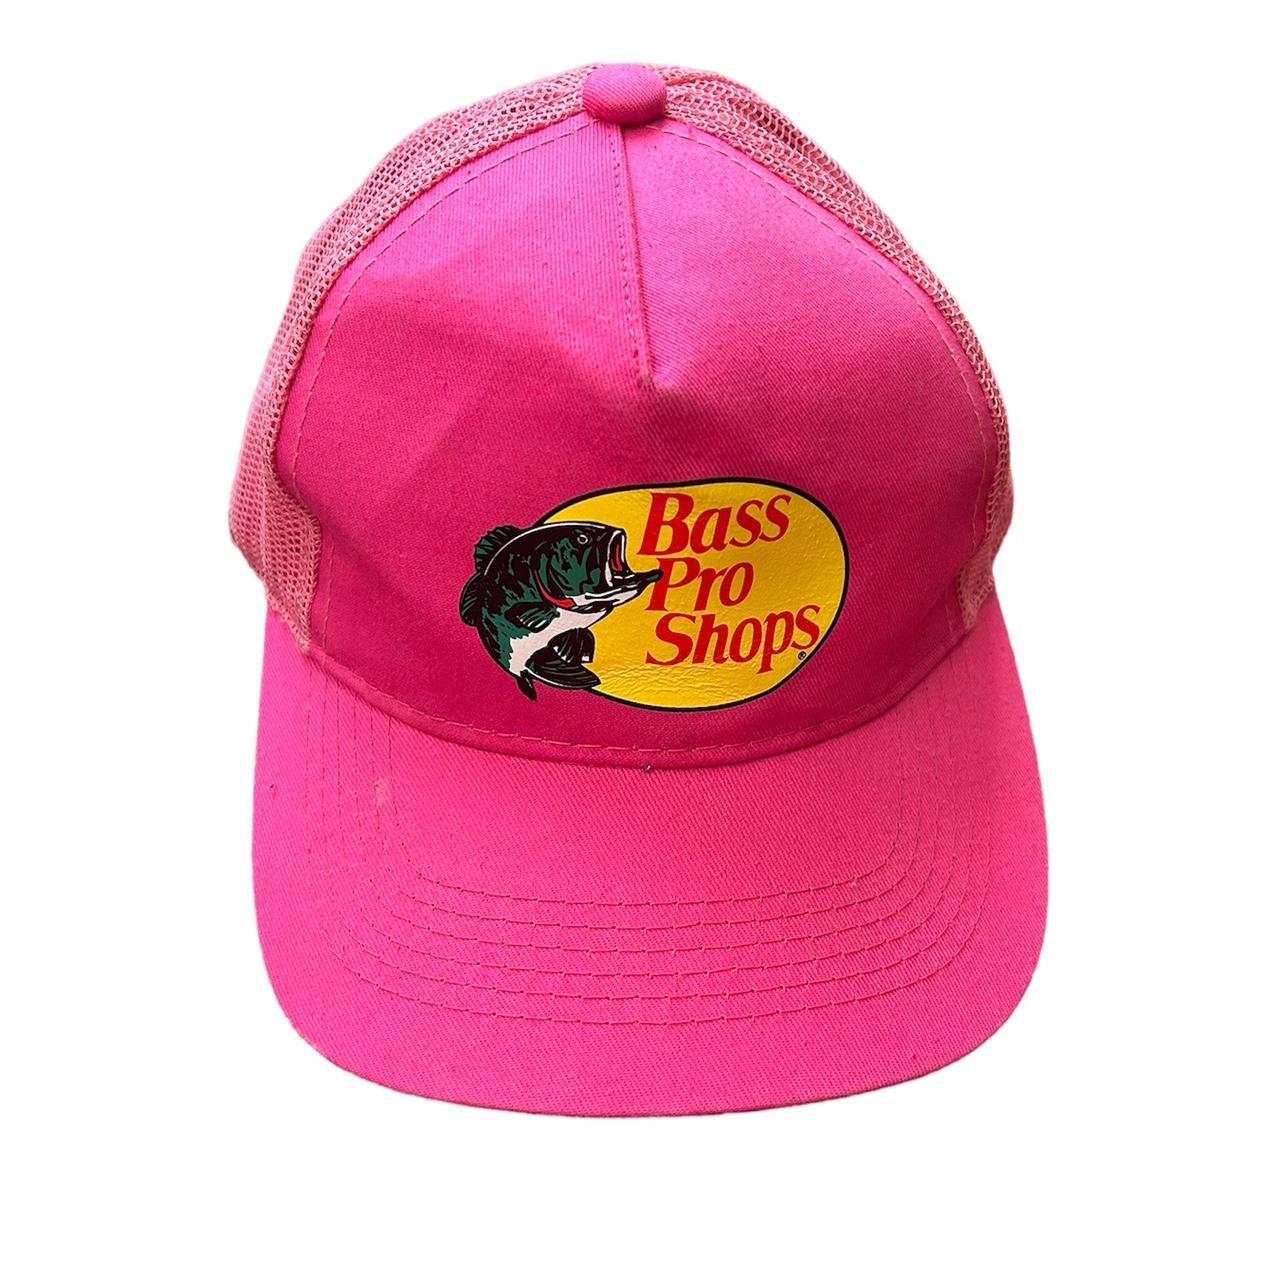 Hot pink bass pro shop hat. Youth sized - Depop